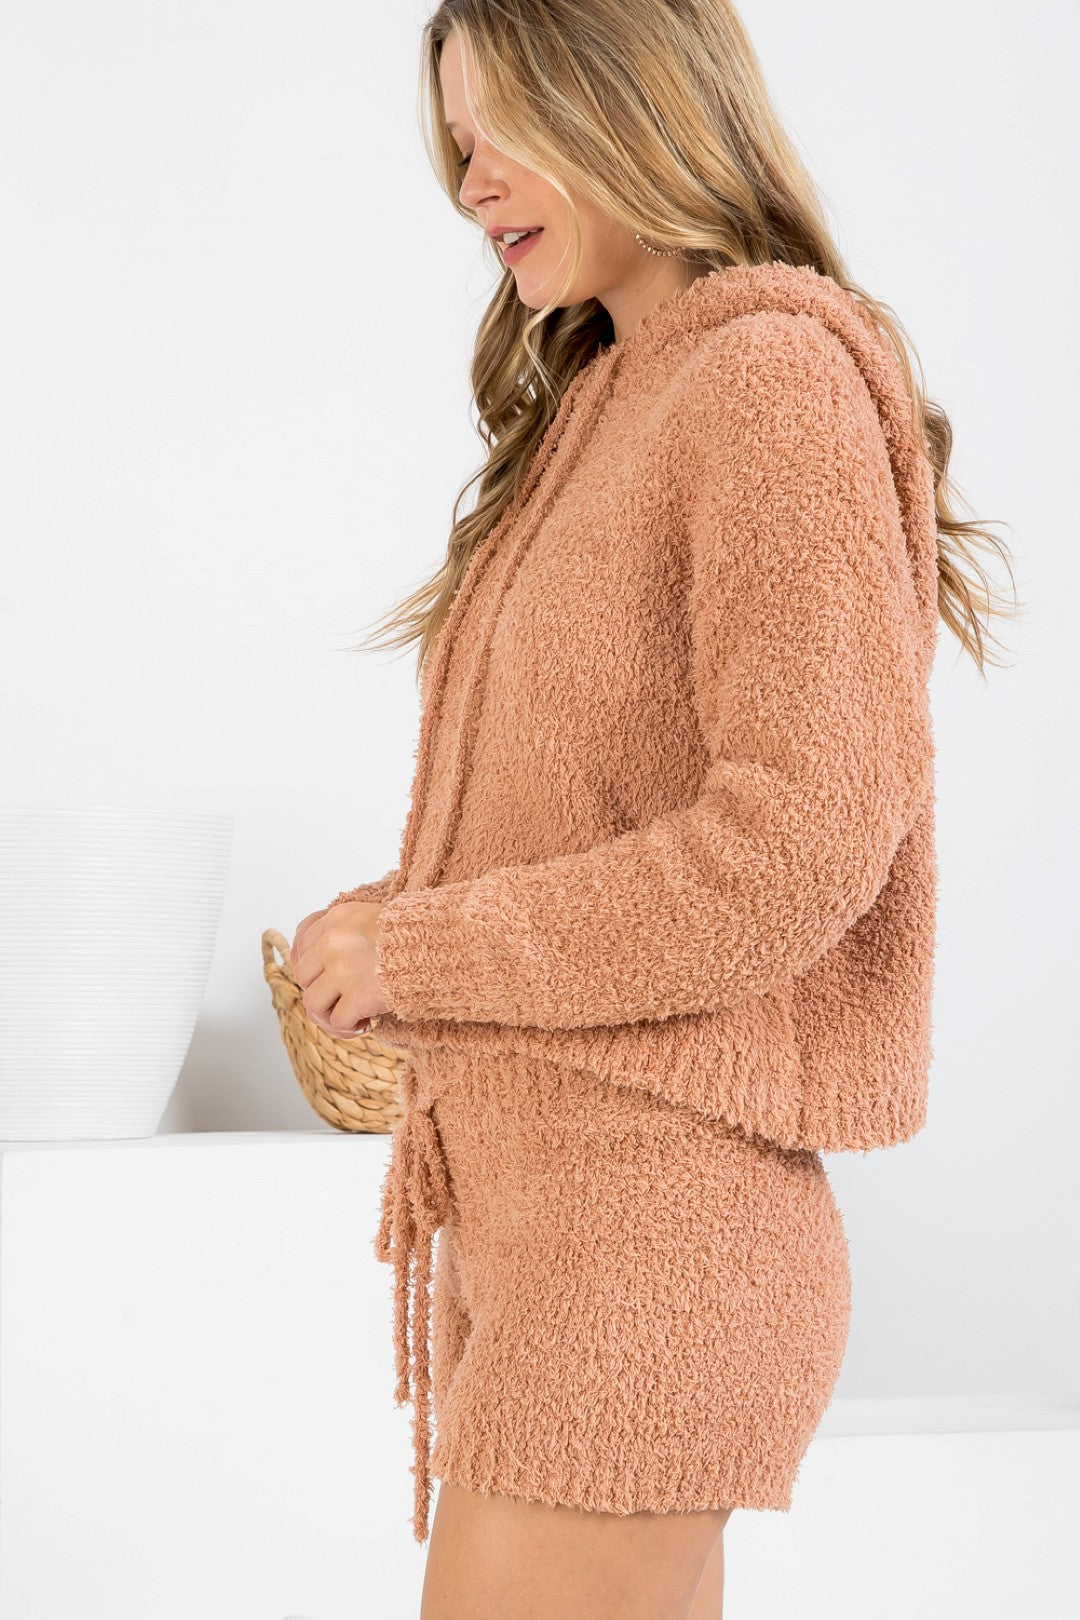 Fuzzy Pullover Hoodie with Stringed Short Pant Sweater Set